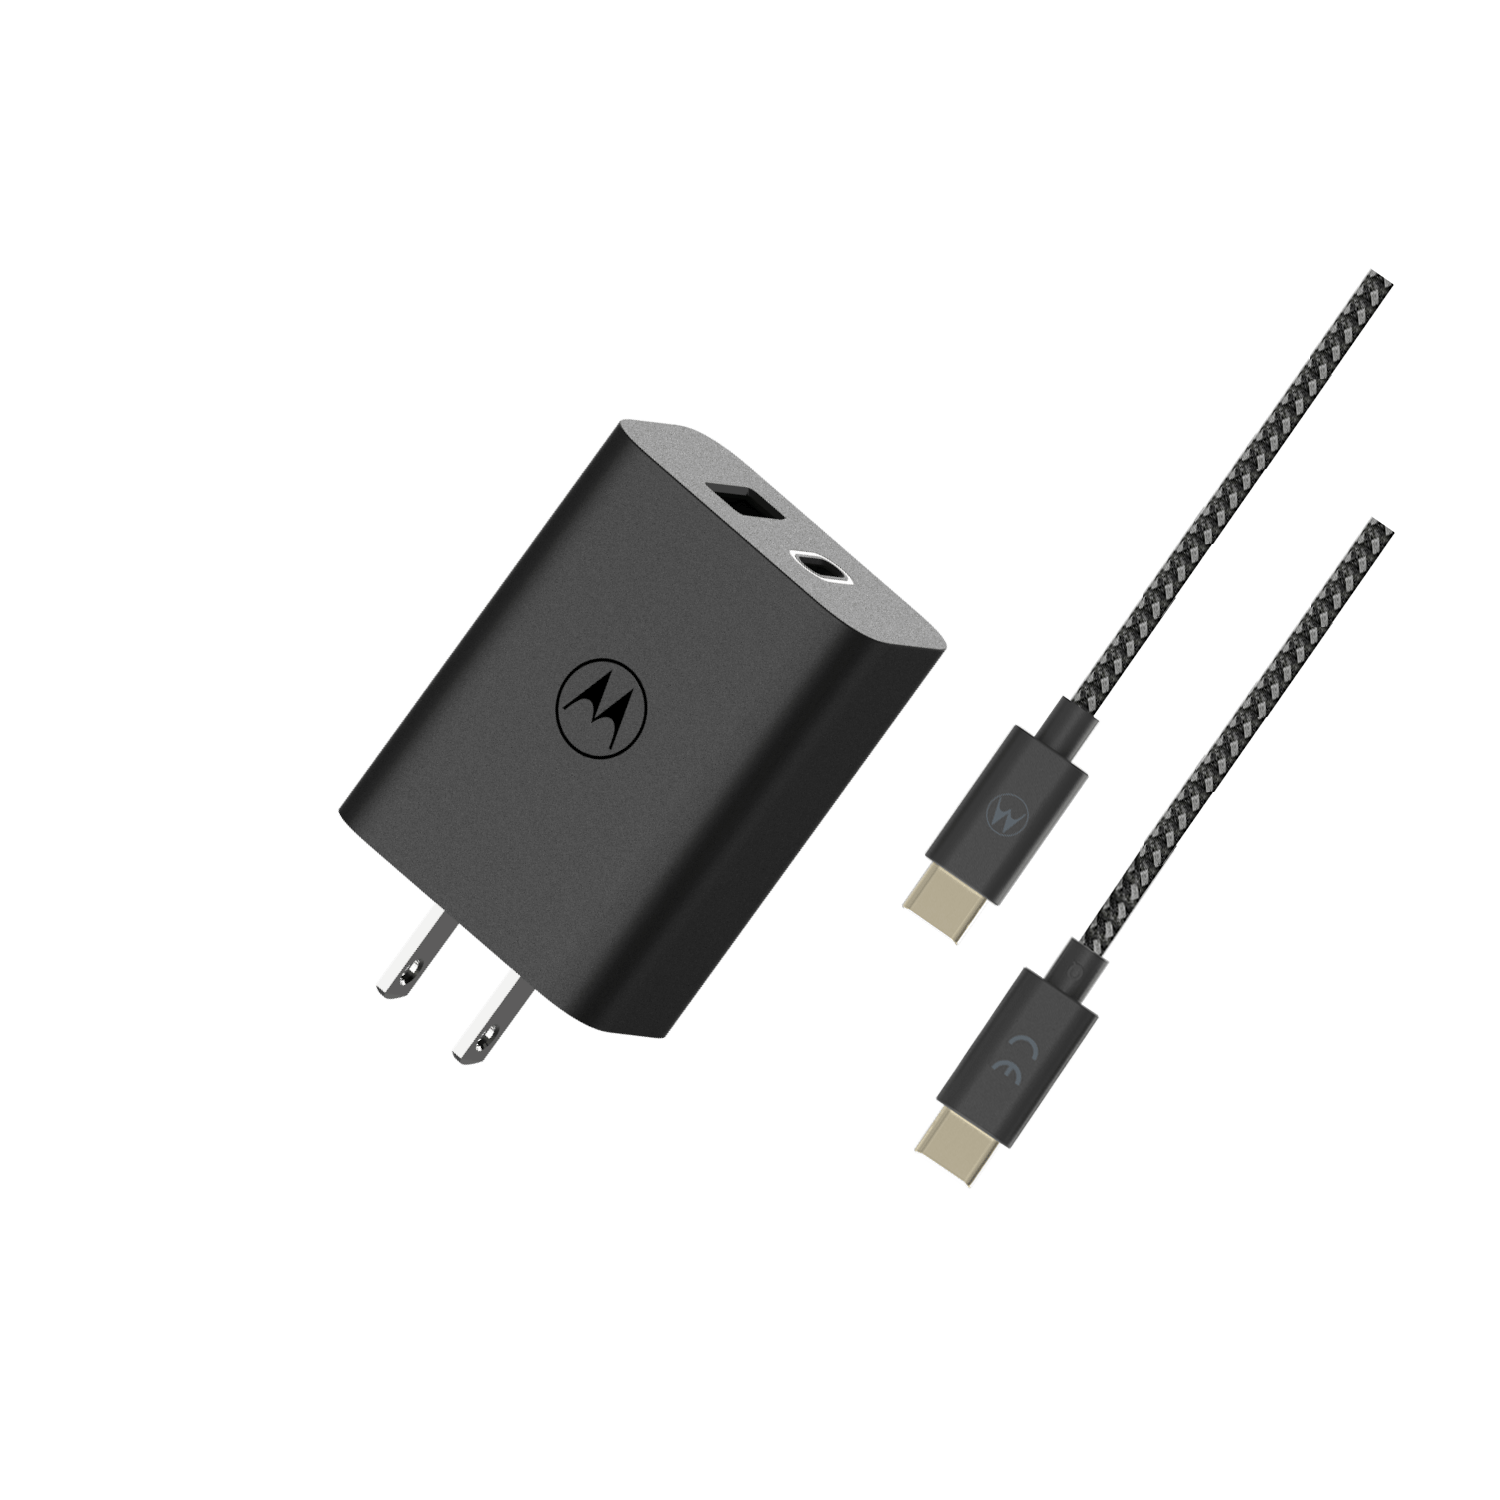 TurboPower™ Share 50W Wall Charger - Motorola